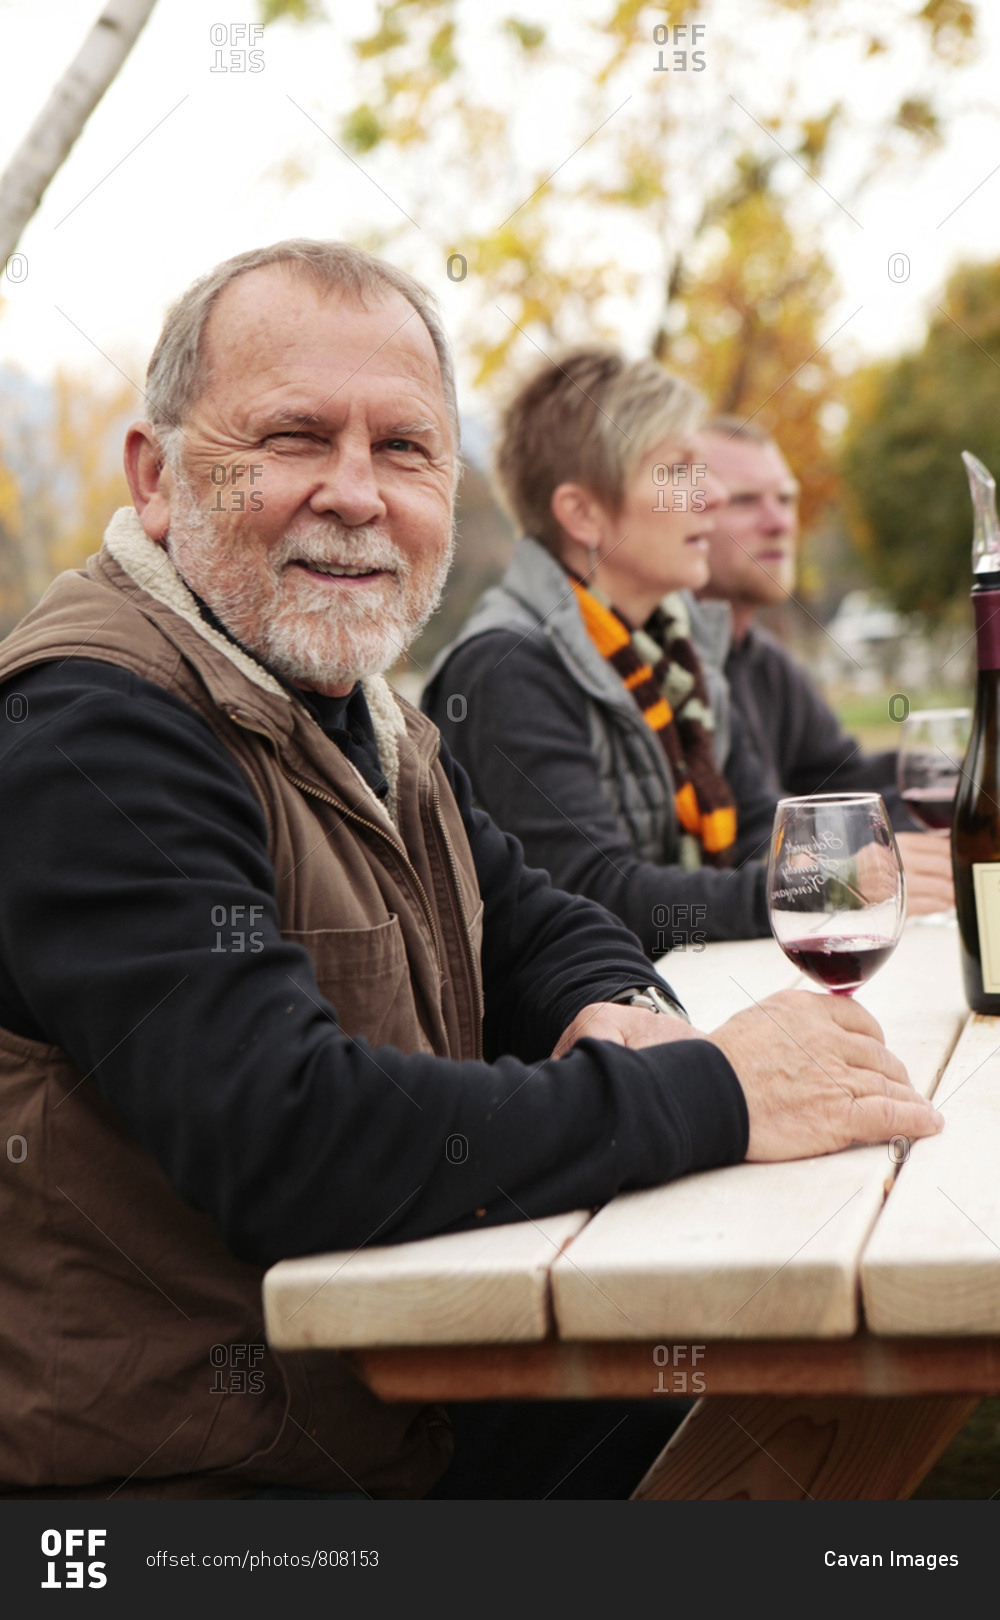 USA, Oregon, Medford, - November 2, 2012: Cal Schmidt enjoys\
a glass of wine on his farm with friends, Schmidt Family Vineyards\
is located in the beautiful Applegate Valley and is owned by Judy\
and Cal Schmidt, the winery consists of country charm, beauti